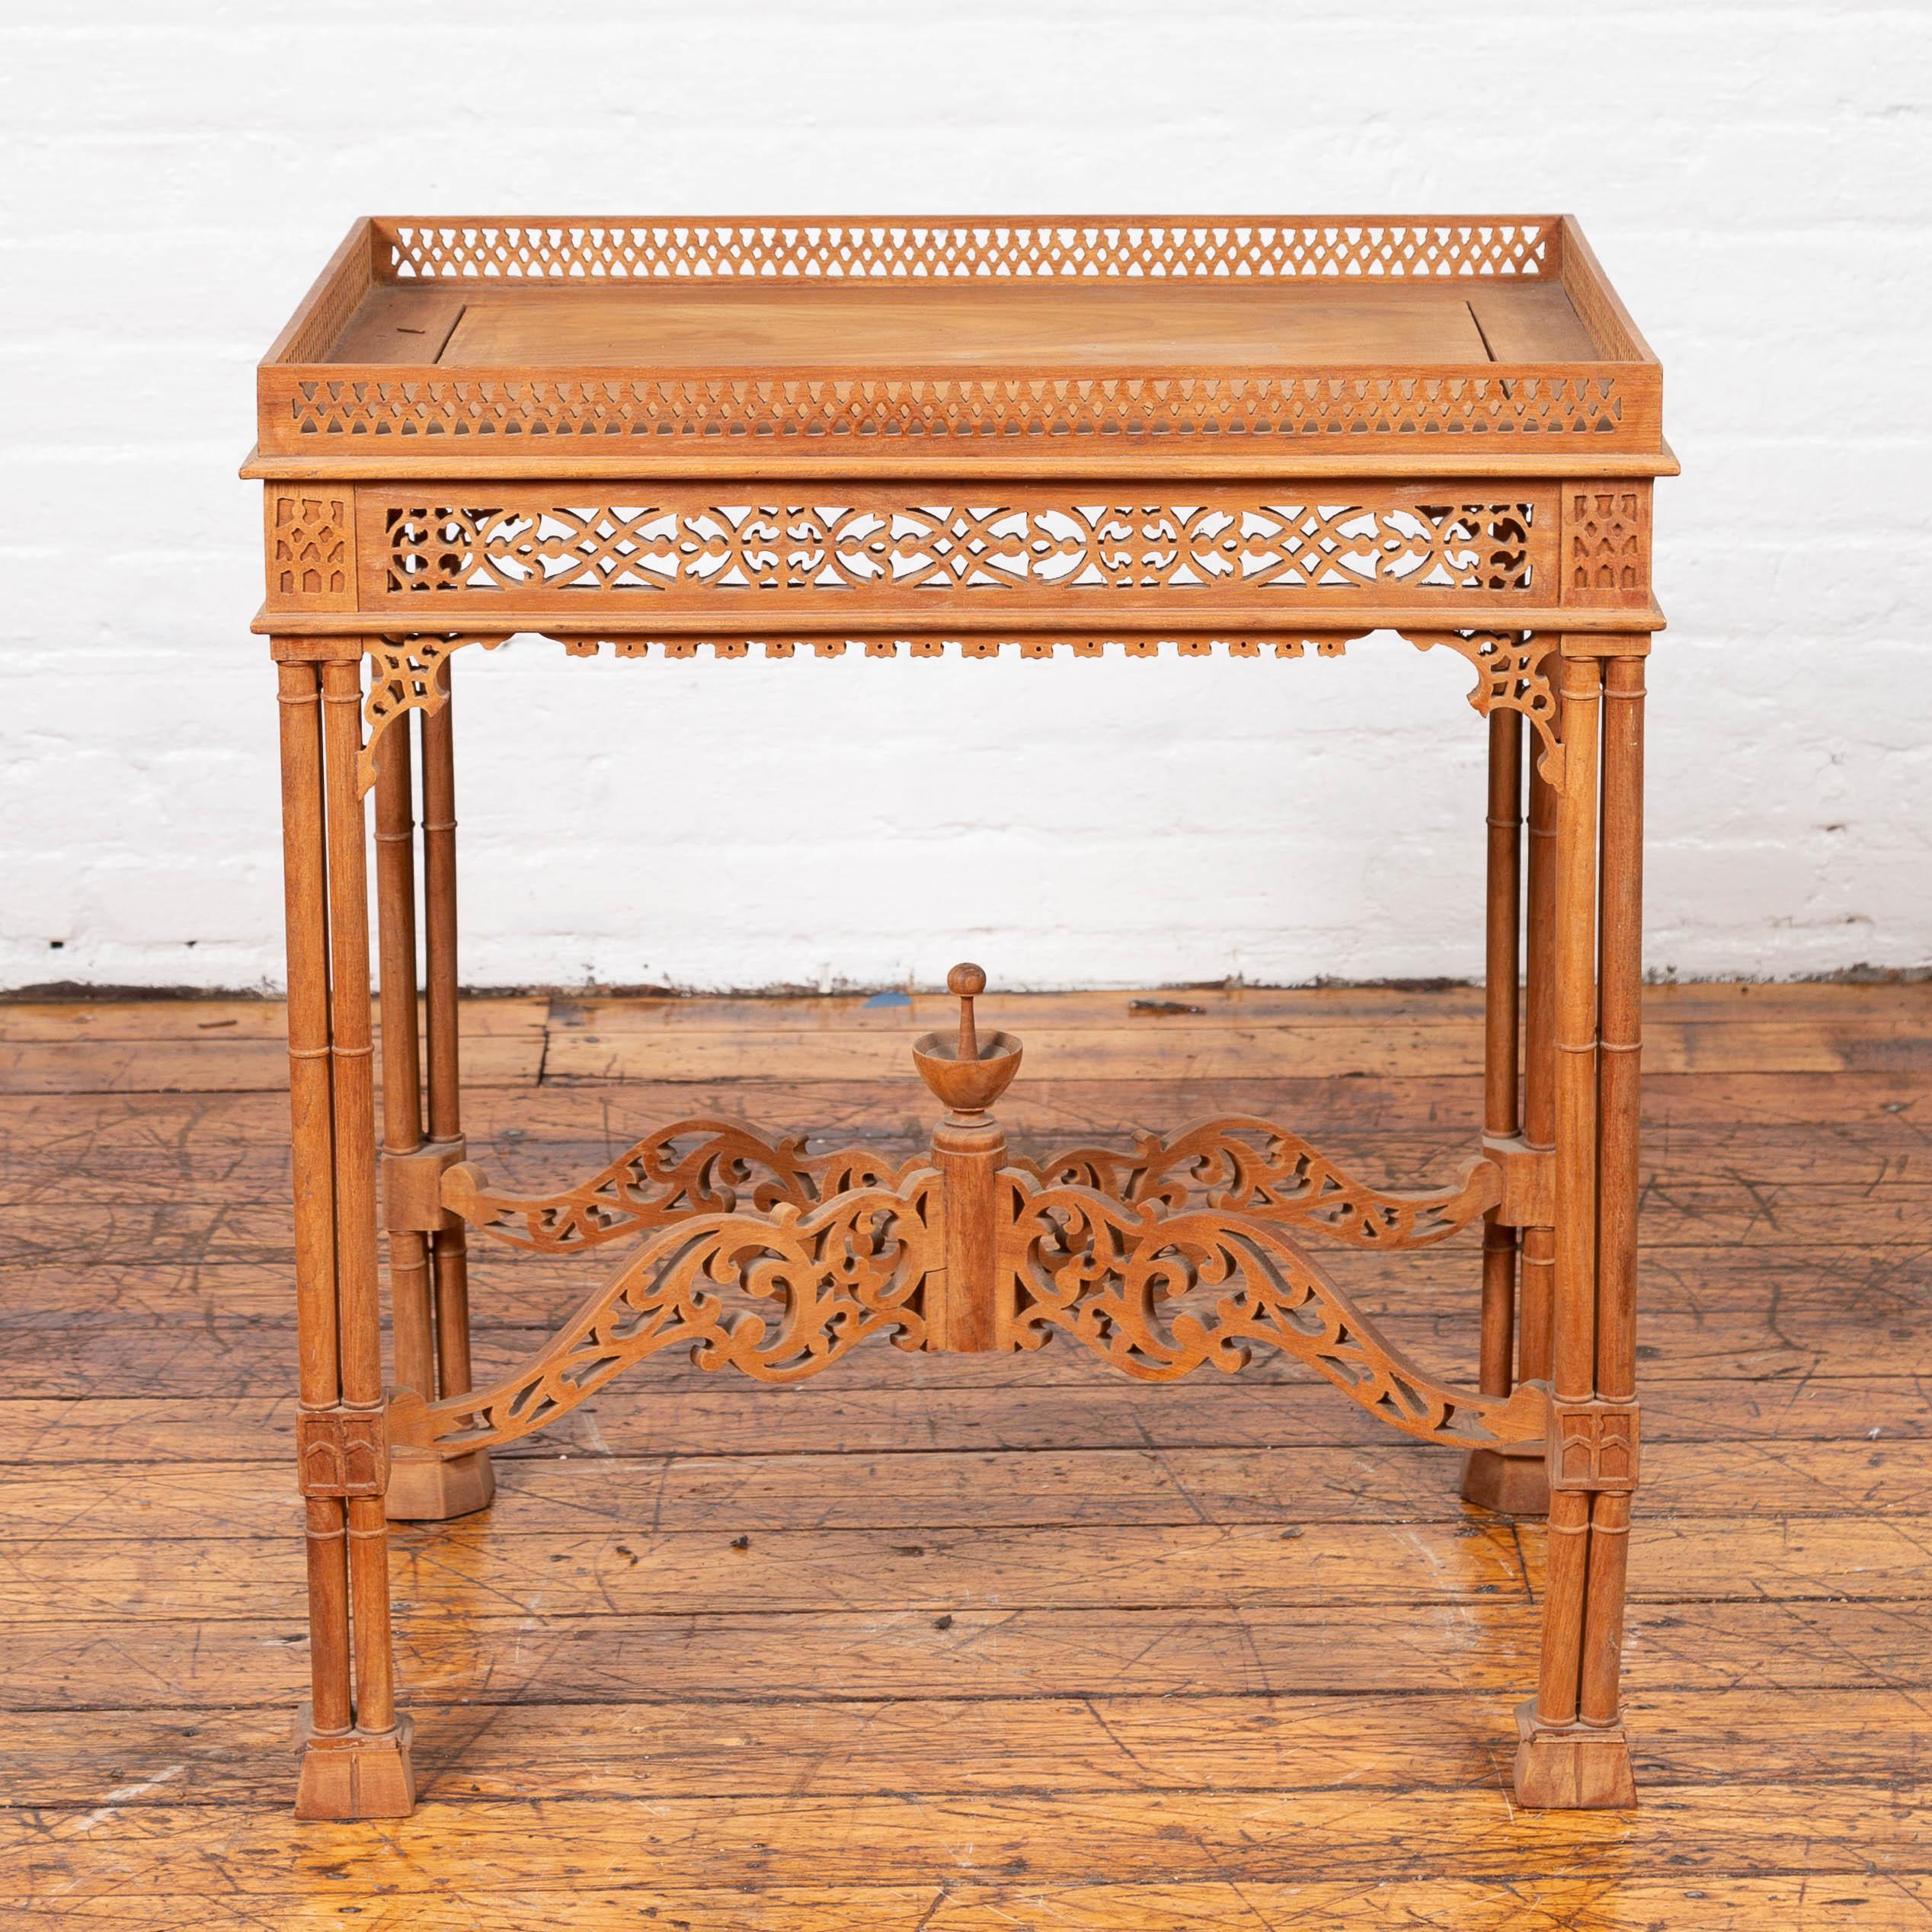 A vintage Indonesian carved side table from the mid-20th century, with open fretwork design and cross stretcher. Our attention is immediately drawn to this side table's intricate carving. Featuring a rectangular tray top surrounded by a pierced